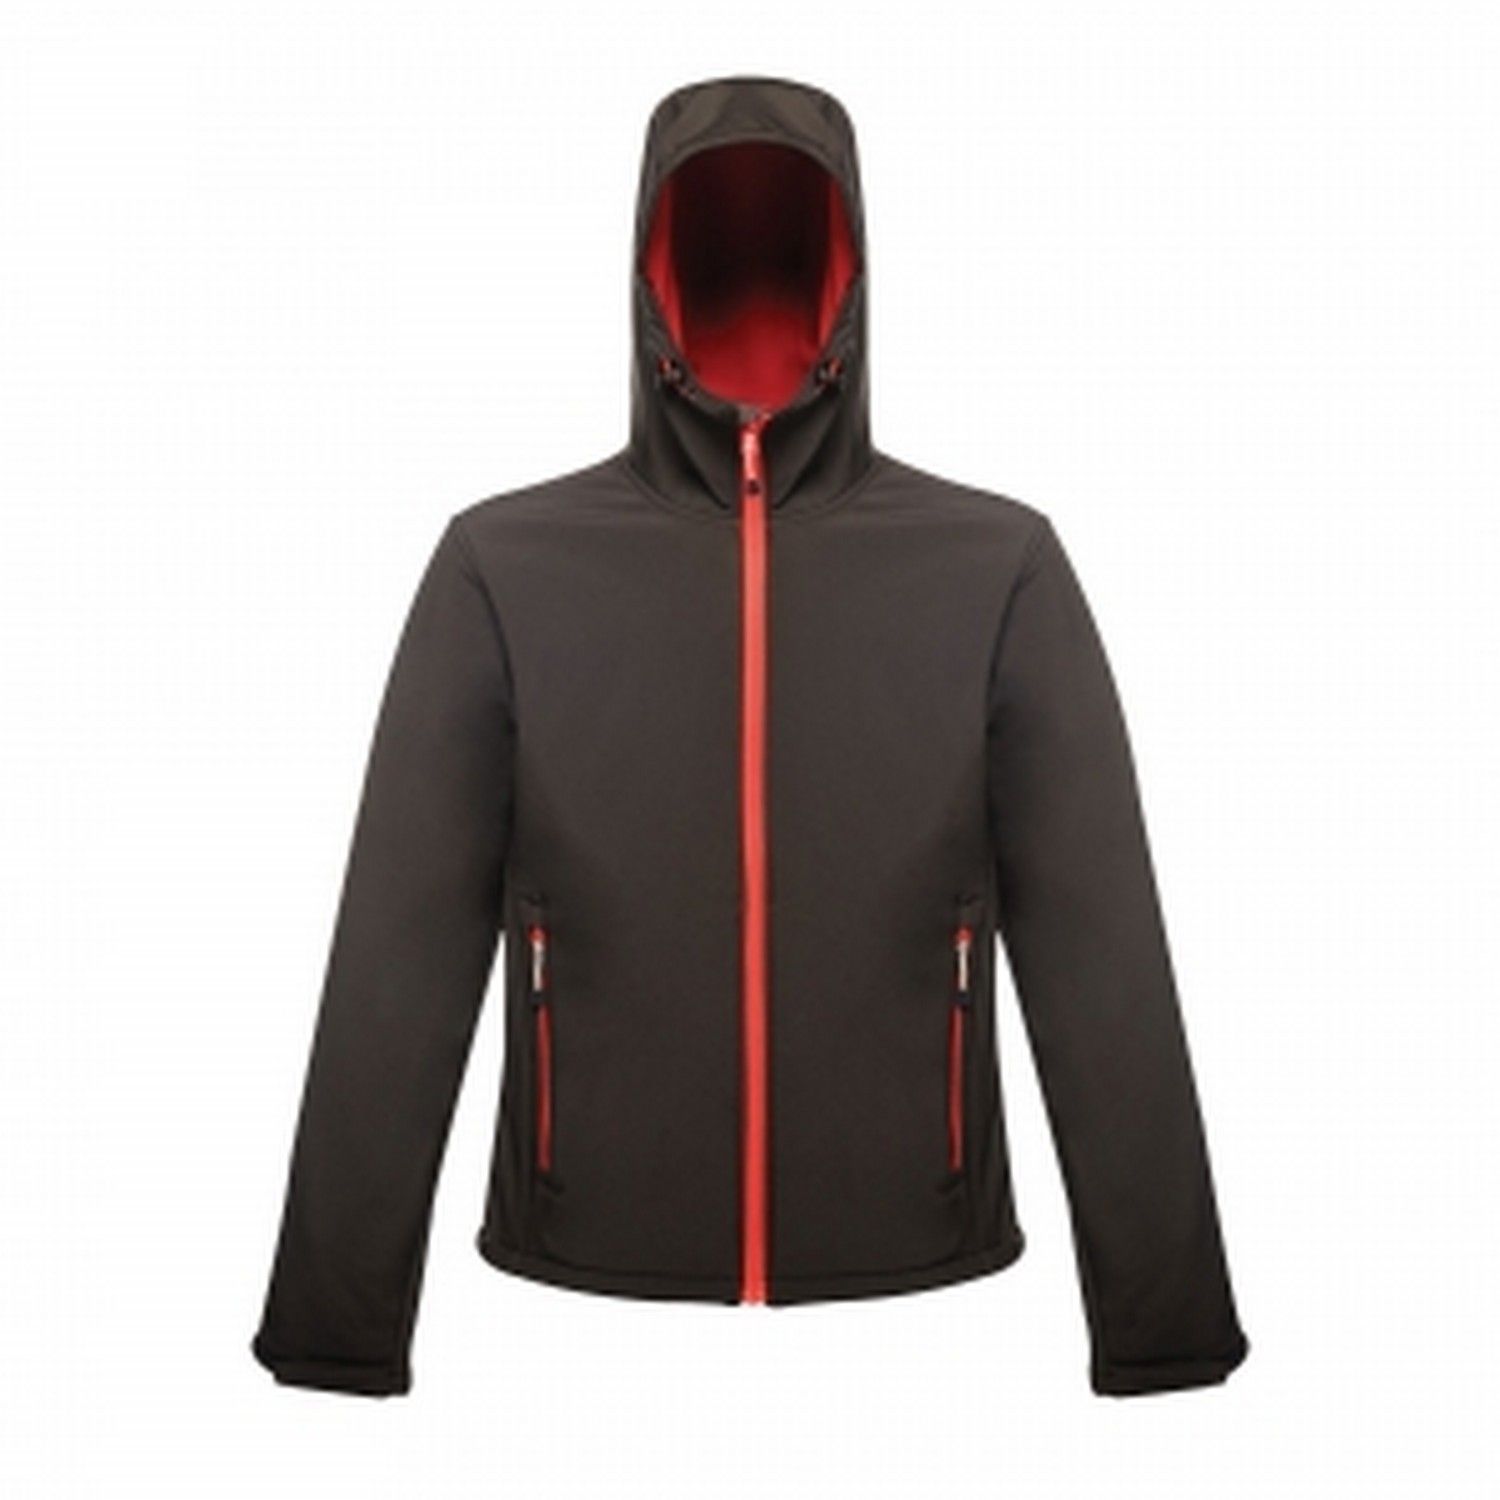 100% Polyester. Warm backed woven stretch softshell fabric. Durable wind resistant, water repellent finish. Integral hood with adjusters. 2 zipped lower pockets. Adjustable cuffs and adjustable shockcord hem.